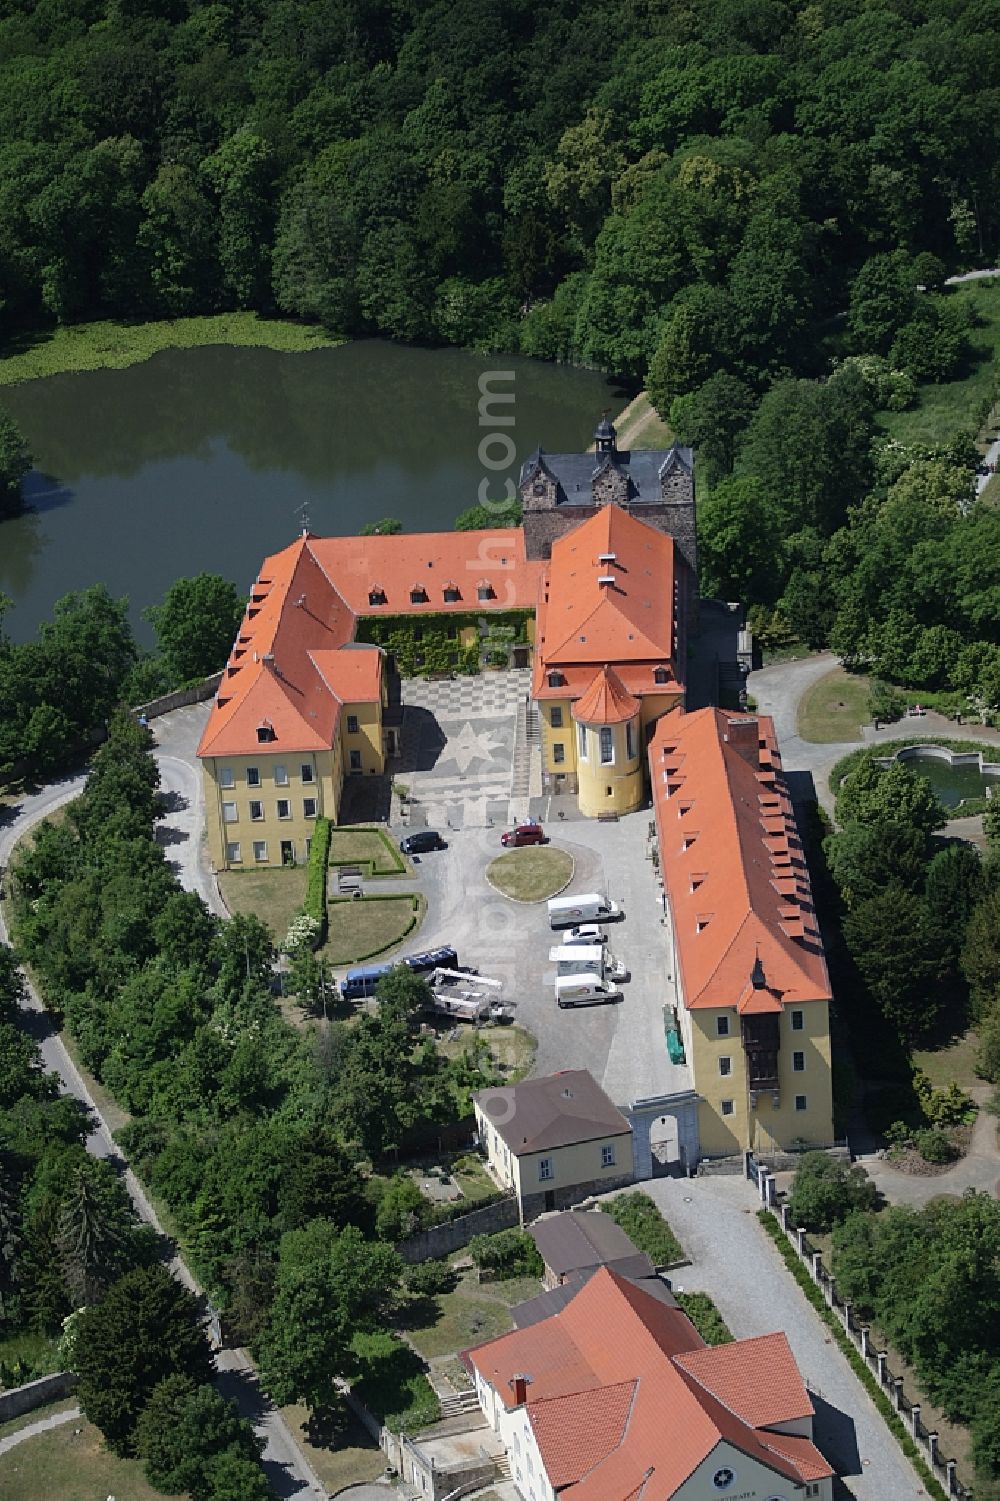 Ballenstedt from the bird's eye view: Building complex in the park of the castle in Ballenstedt in the state Saxony-Anhalt, Germany